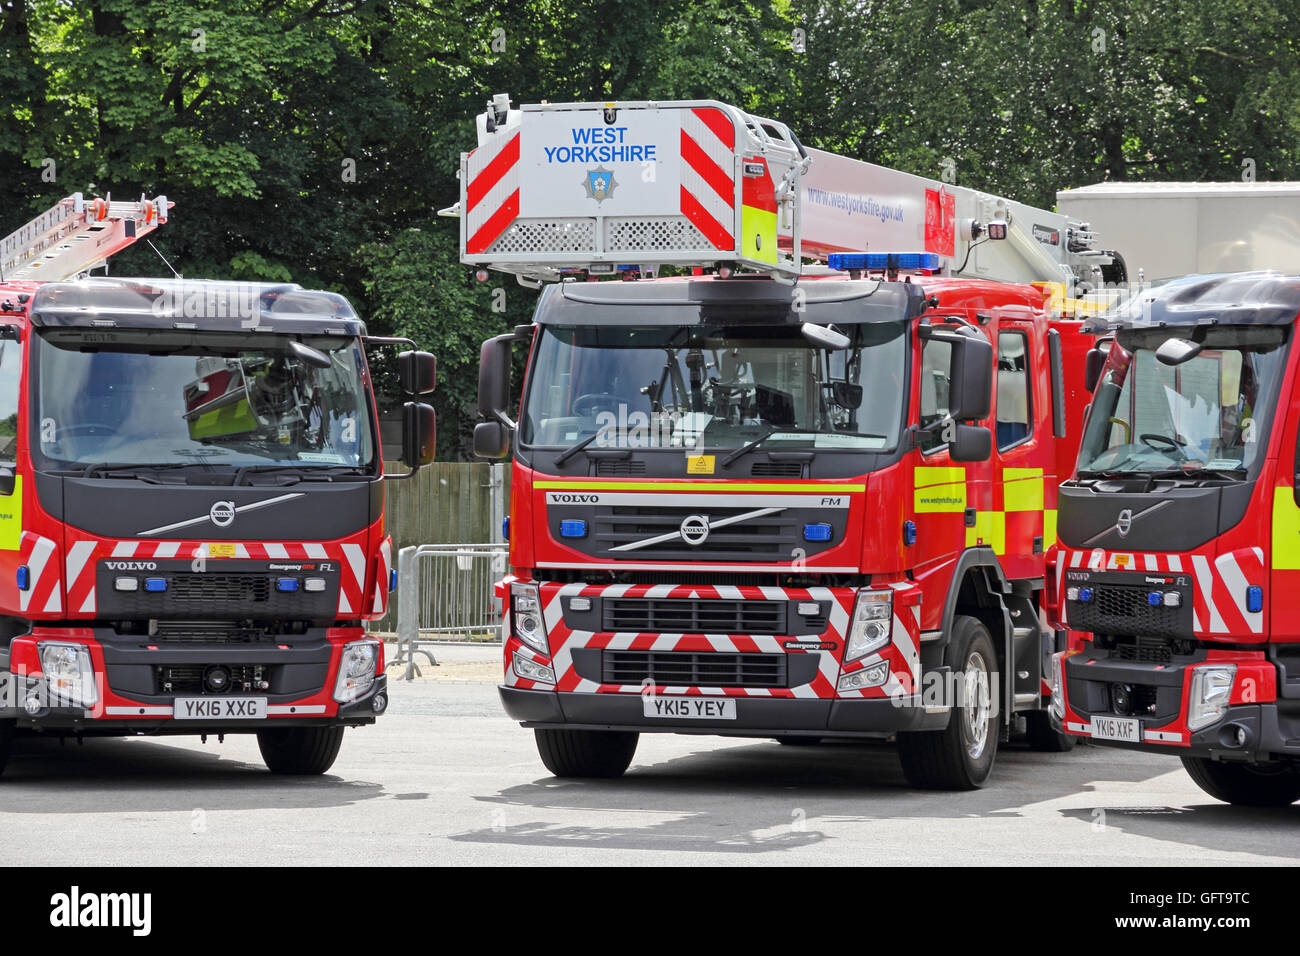 West Yorkshire Fire Service High Resolution Stock Photography and Images -  Alamy